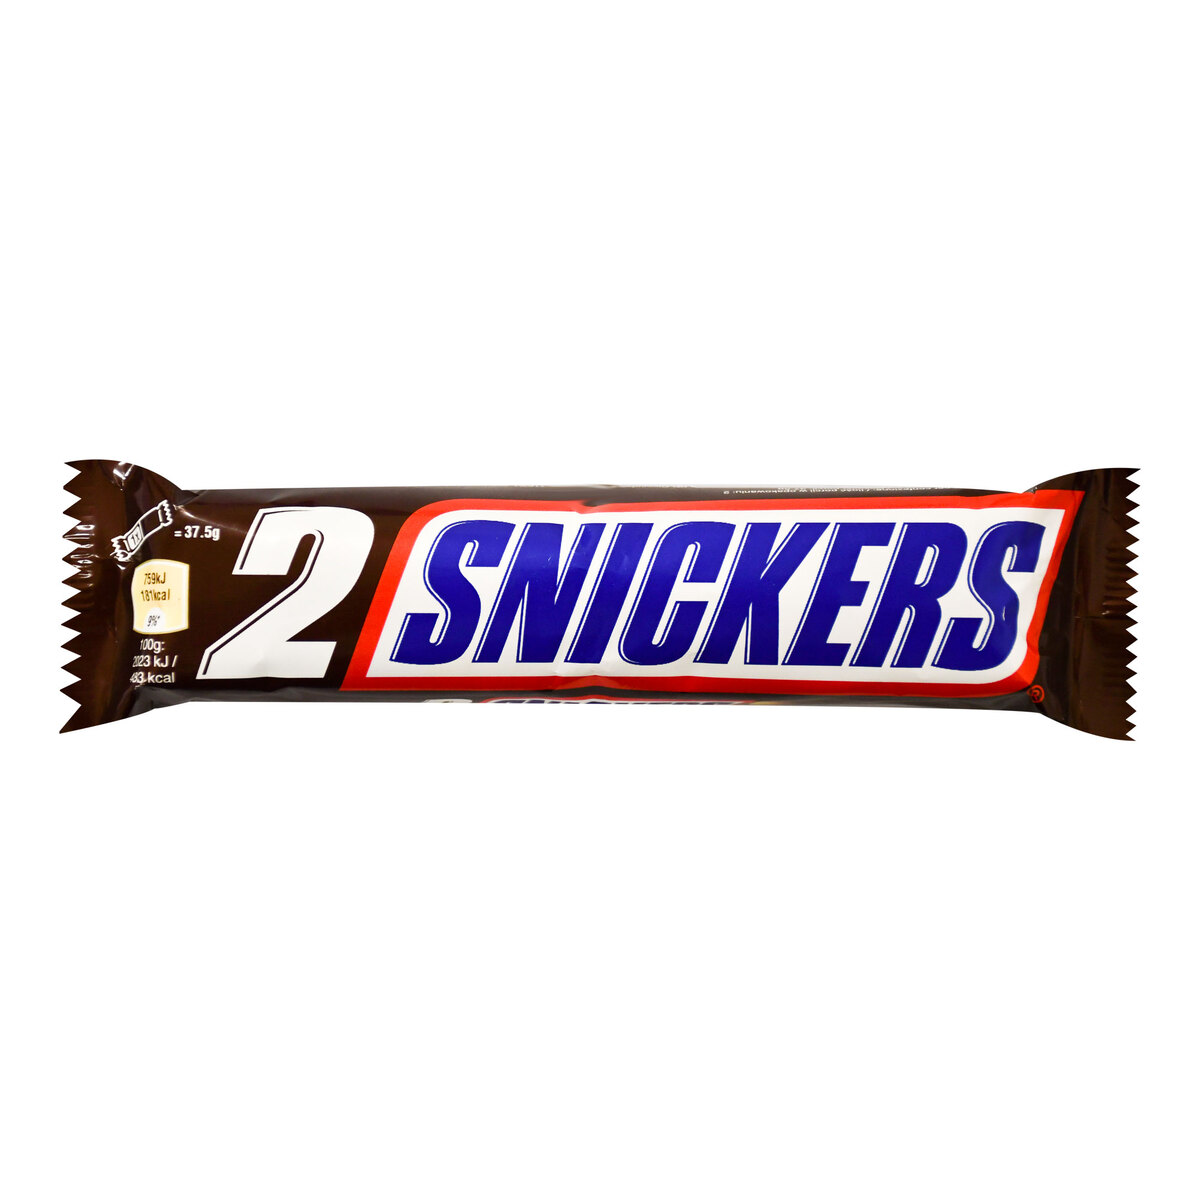 Snickers Chocolate Bar 2 x 37.5 g